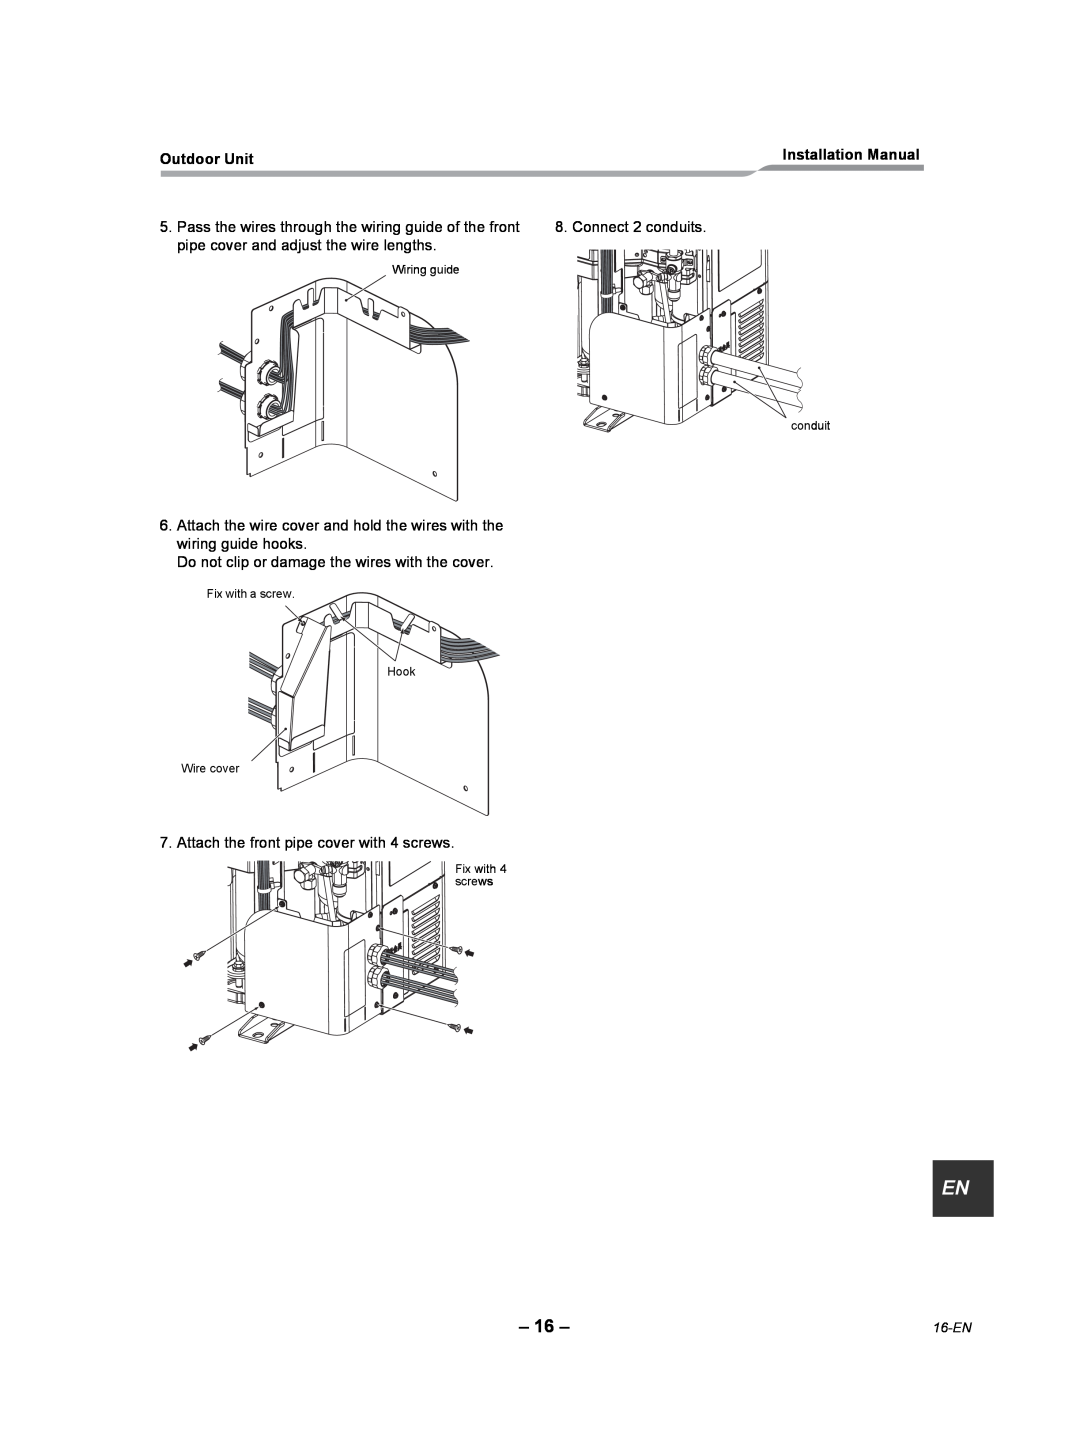 Toshiba RAV-SP240AT2-UL installation manual Connect 2 conduits, pipe cover and adjust the wire lengths, 16-EN 